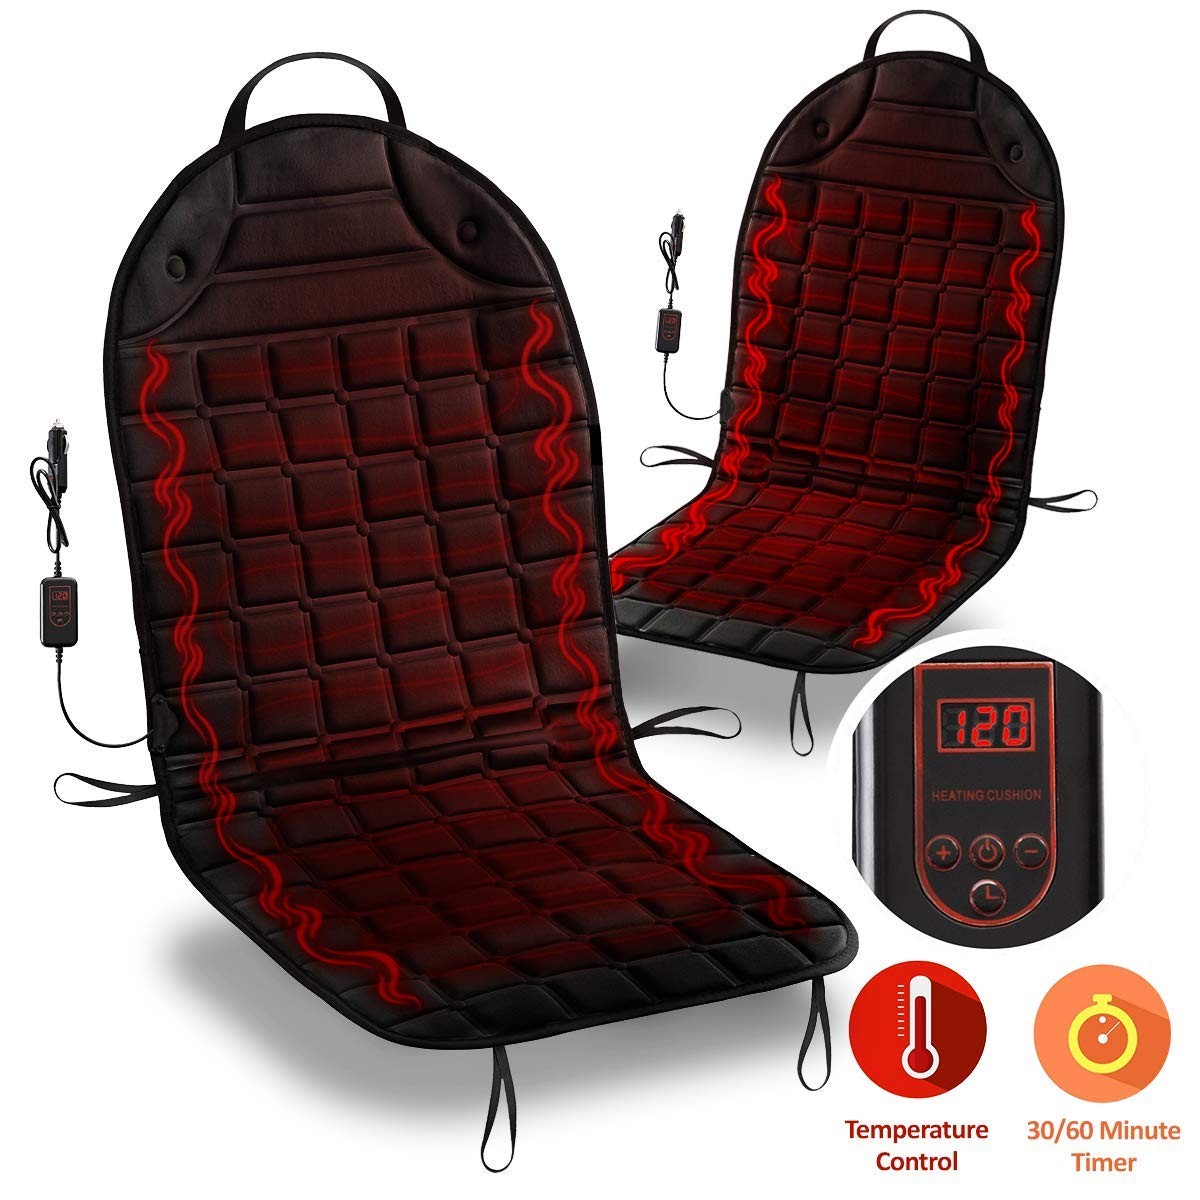 Black 12V High/ Low Temperature Control Heated Seat Cushion- Set of 2